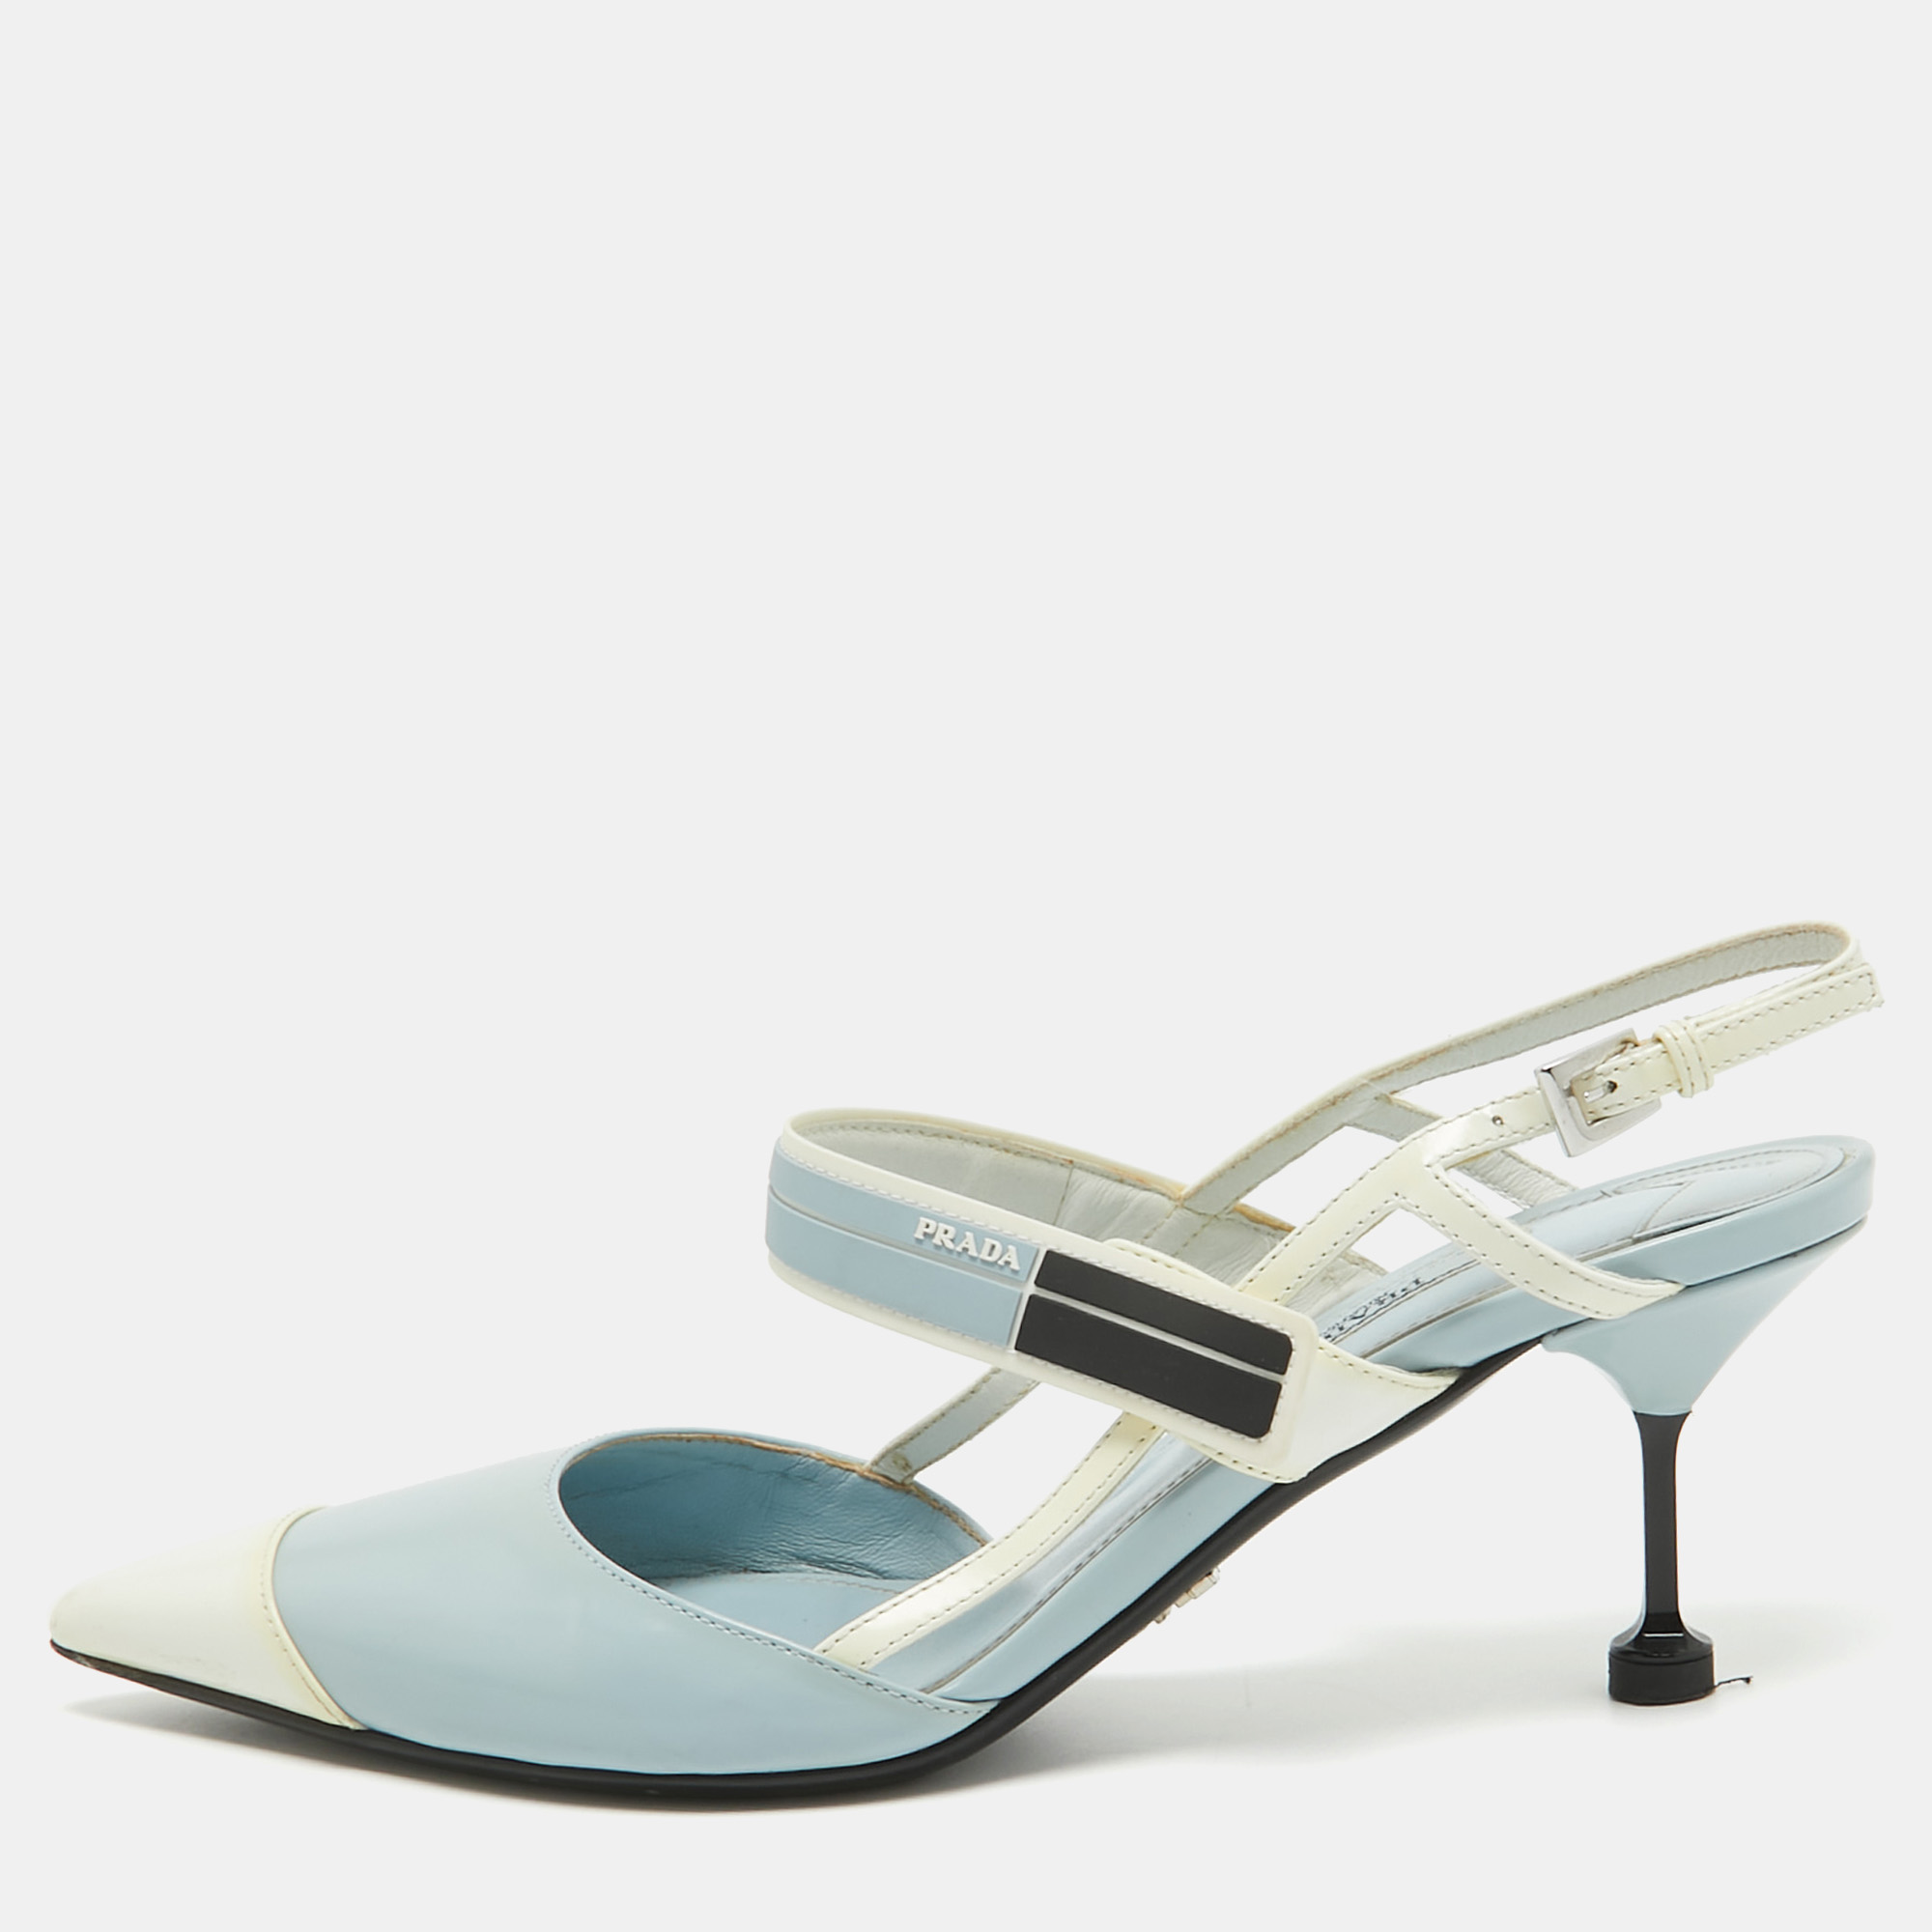 

Prada Light Blue/White Leather and Rubber Pointed-Toe Slingback Pumps Size